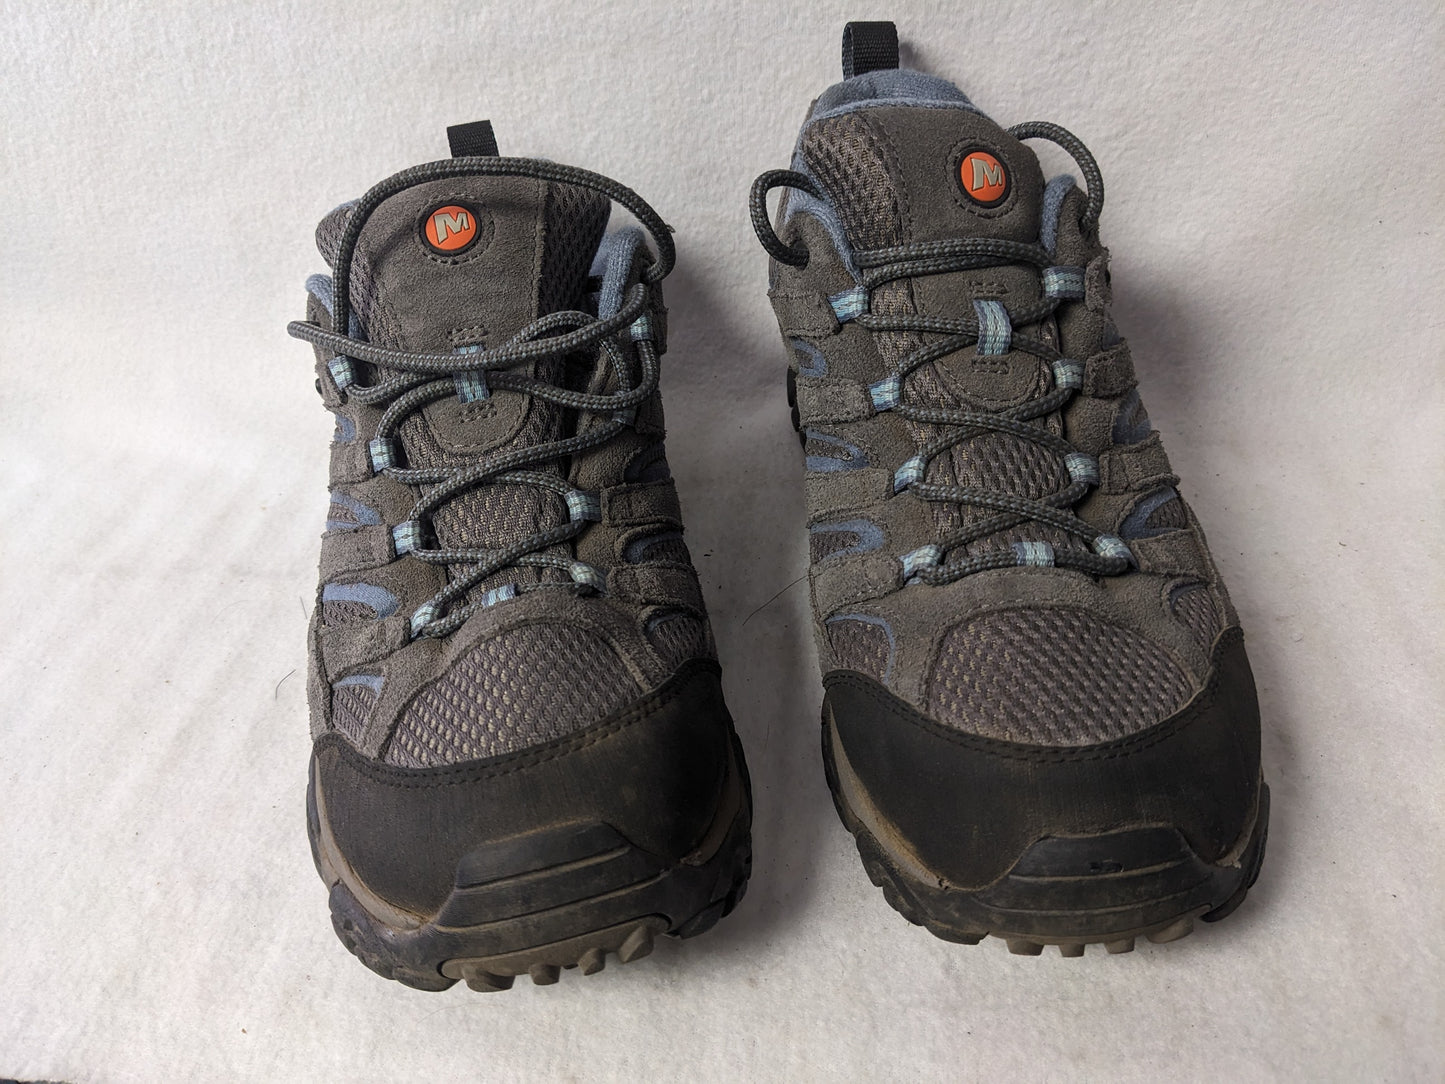 Merrell Women's Granite Hiking Shoes Size Women 10.5 Color Gray Condition Used